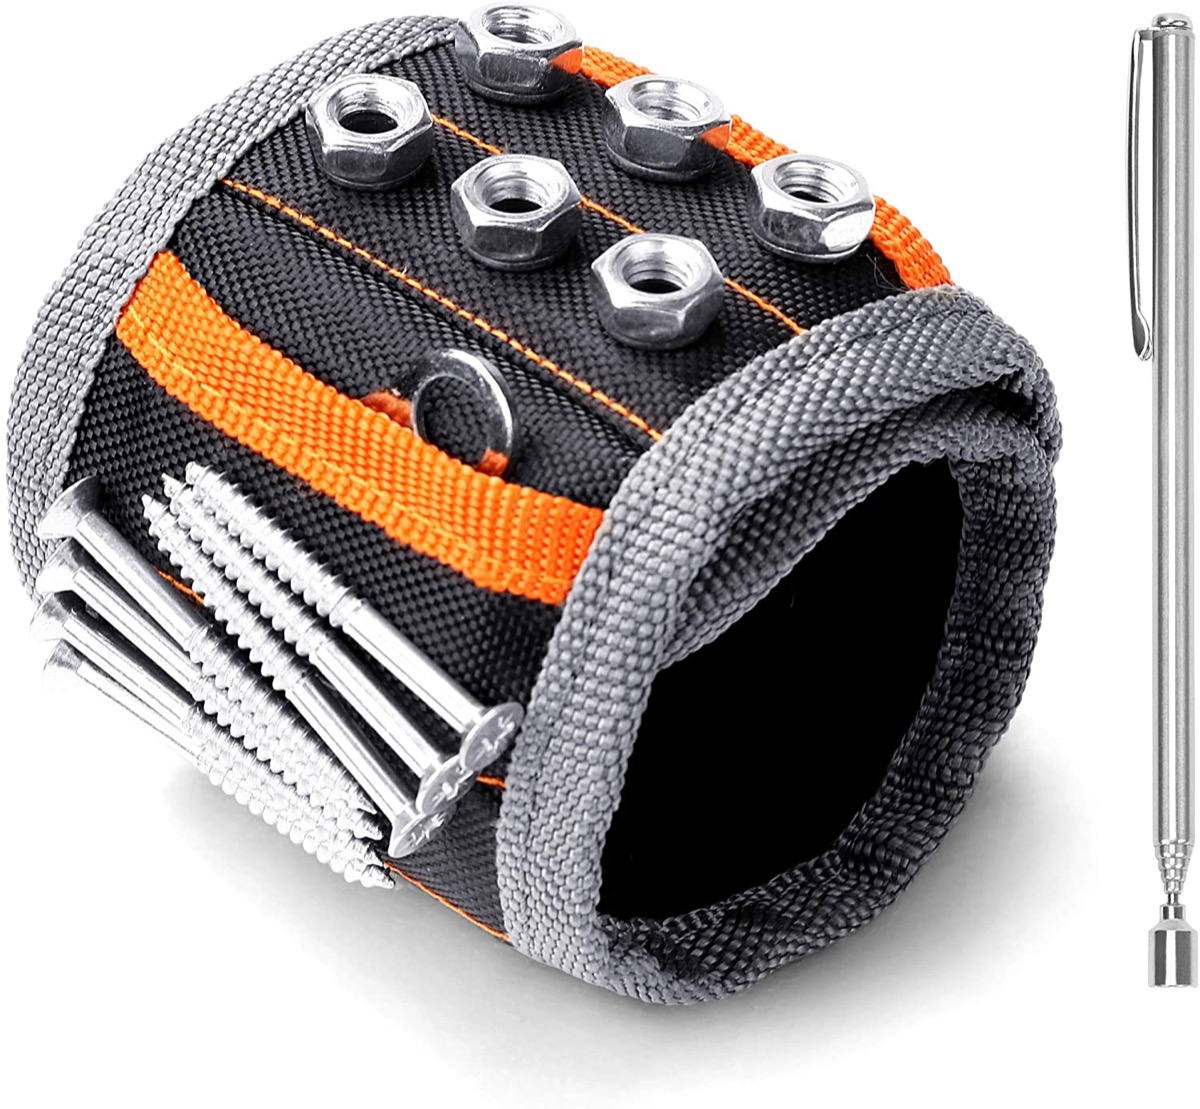 Magnetic wrist band with bolts and screws